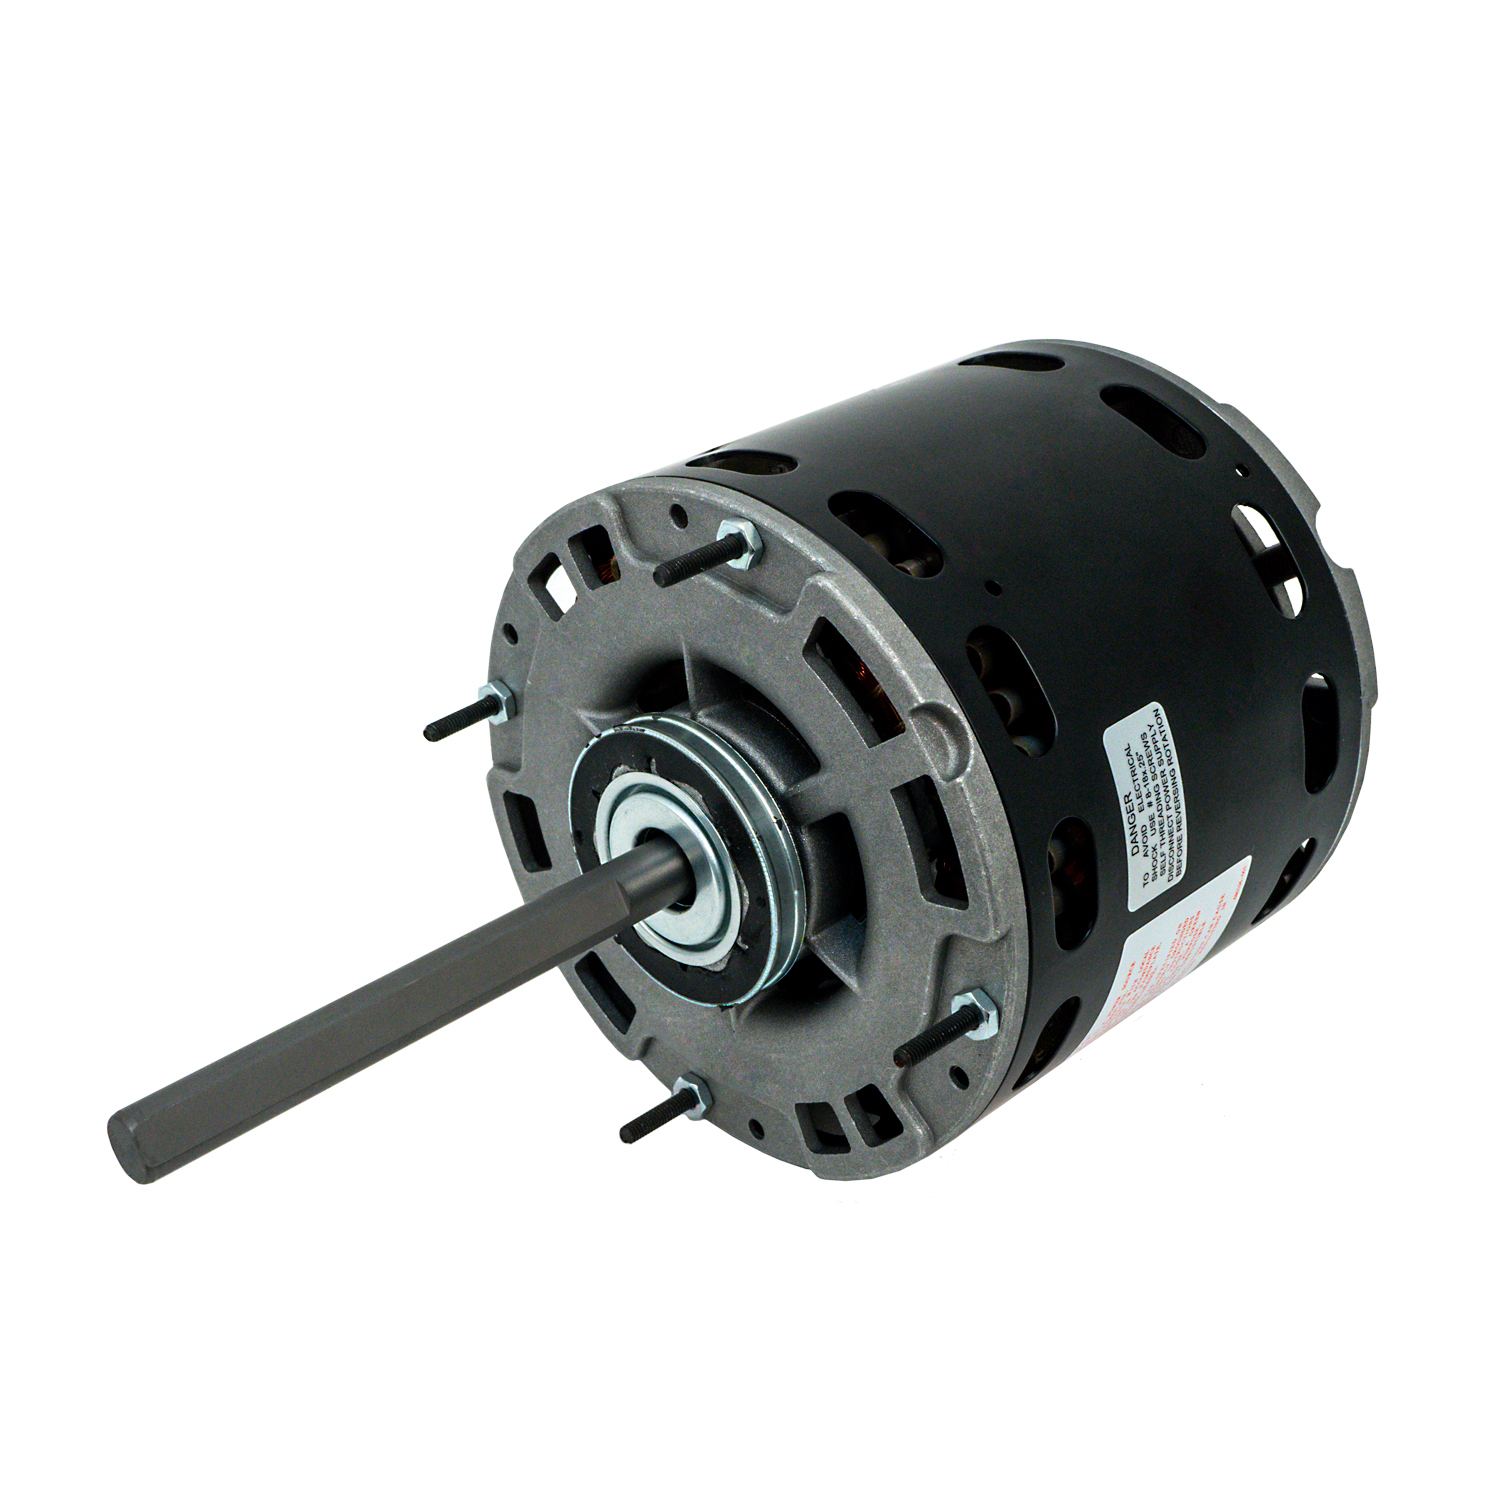 48 Frame Direct Drive Blower Motor, 3/4 HP, 115 Volts, 1075 RPM, 3 Speed